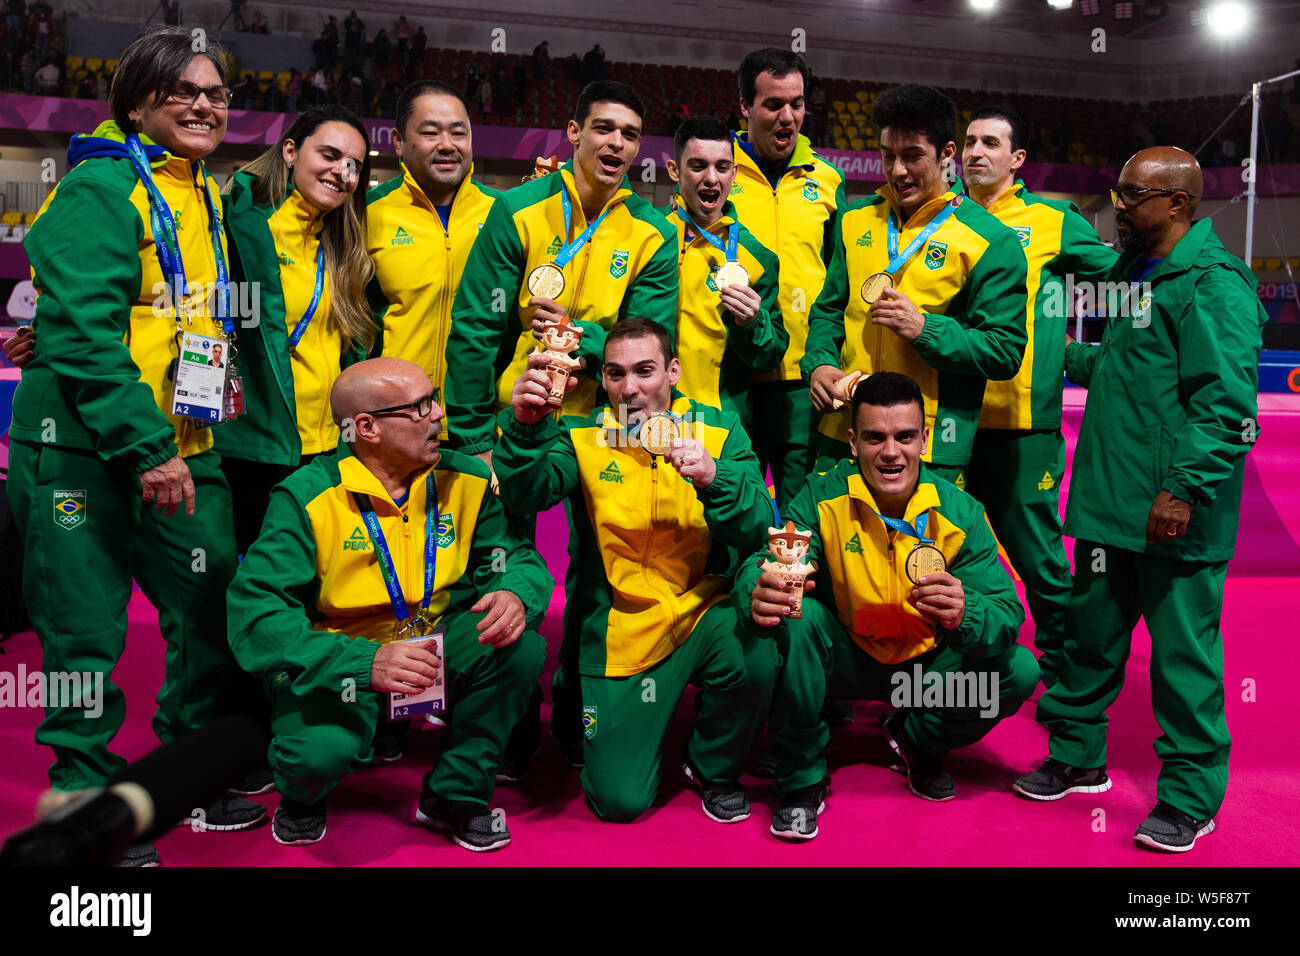 Lima, Peru. 29th July, 2019. Brazilian Men's Artistic Gymnastics team and coaches pose after winning the gold medal in the Pan American Games Artistic Gymnastics, Men's Team Qualification and Final at Polideportivo Villa el Salvador in Lima, Peru. Daniel Lea/CSM/Alamy Live News Stock Photo